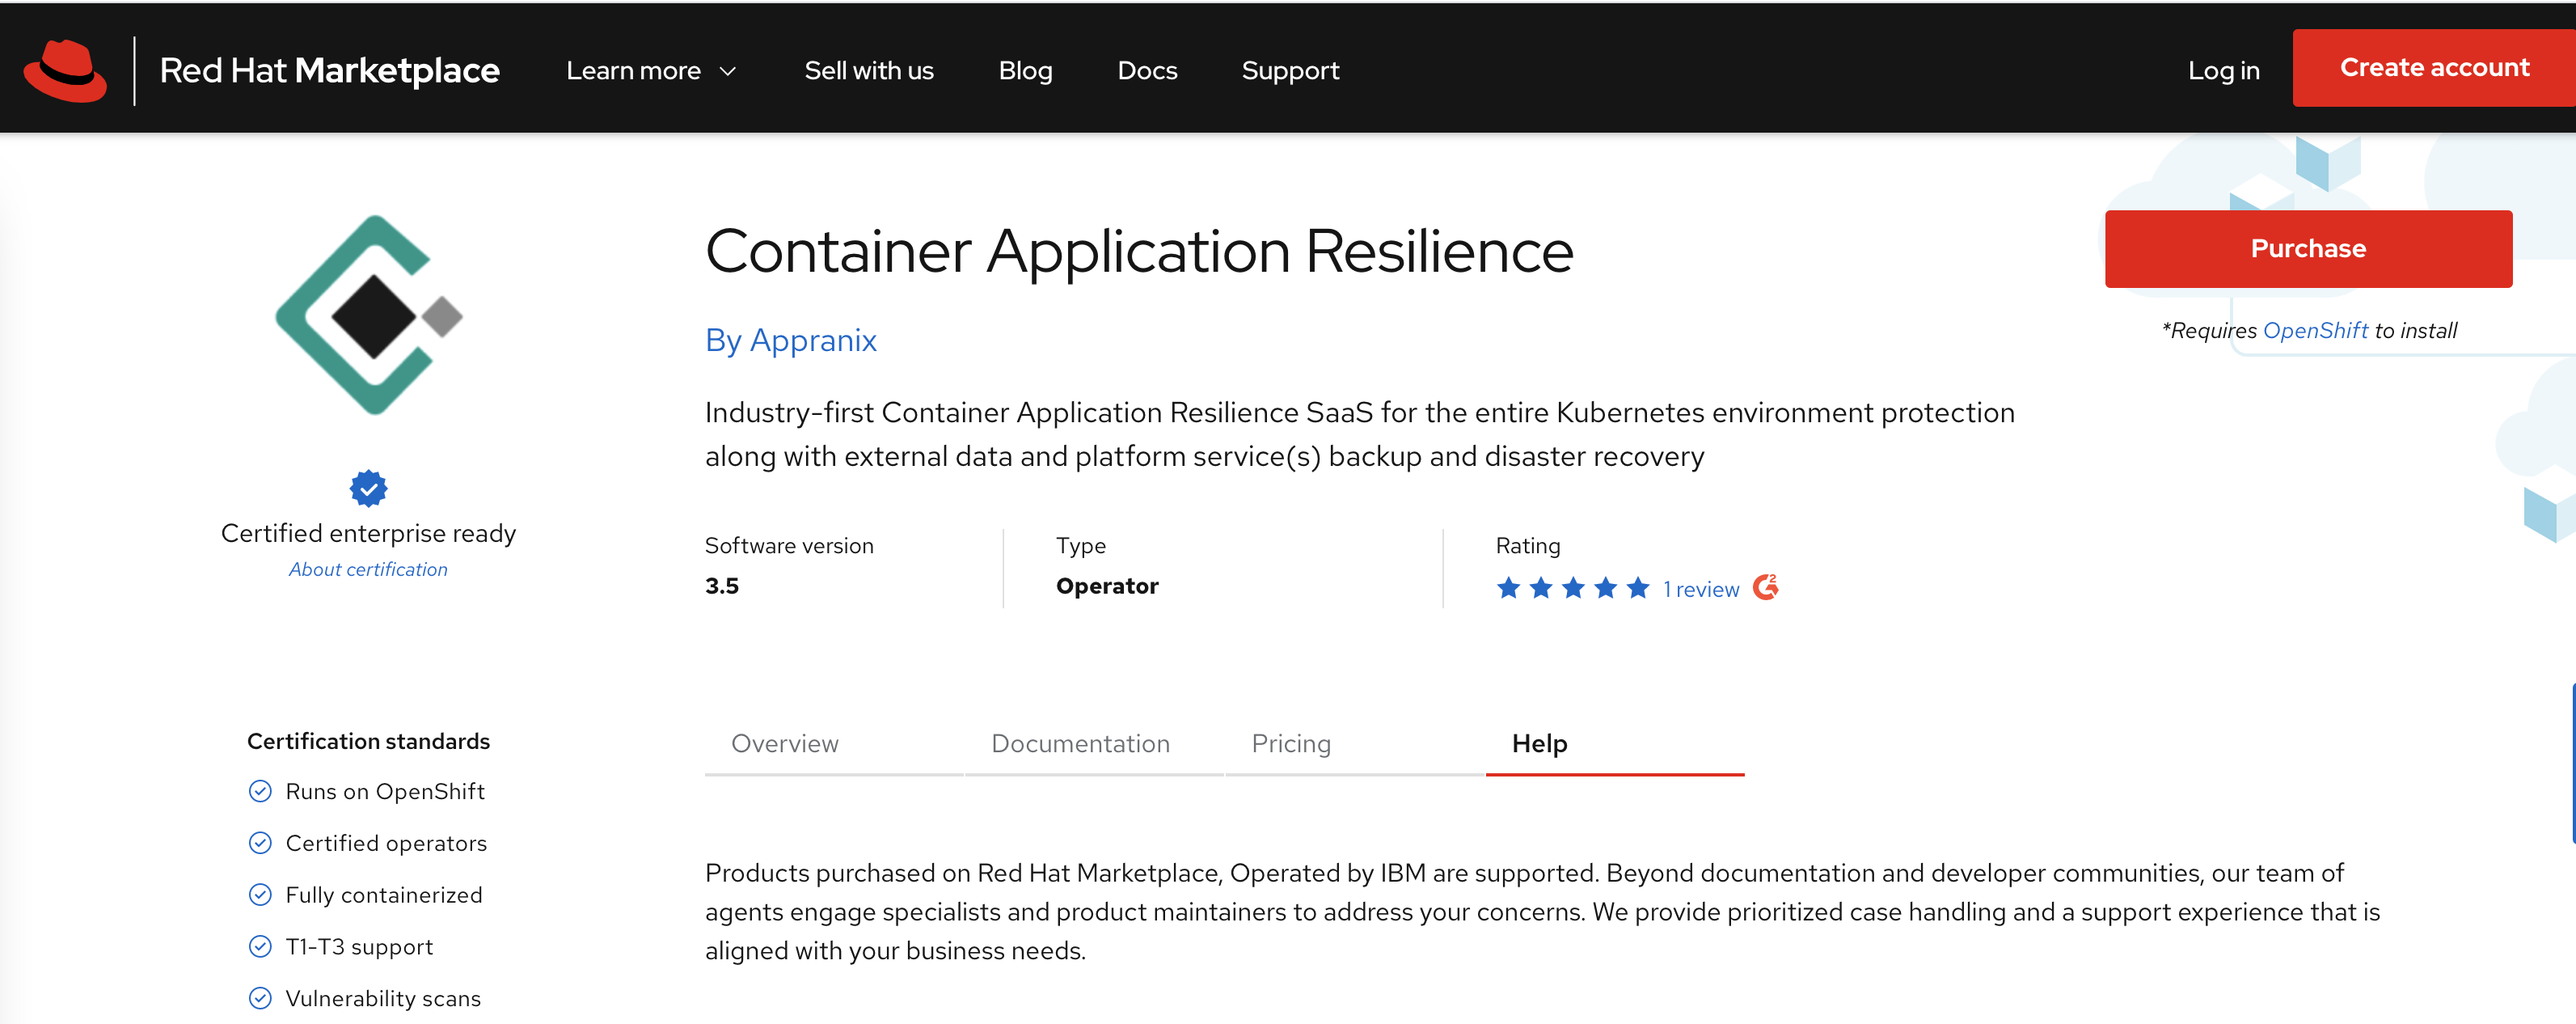 Appranix Availability Container Application Resilience on Red Hat Marketplace